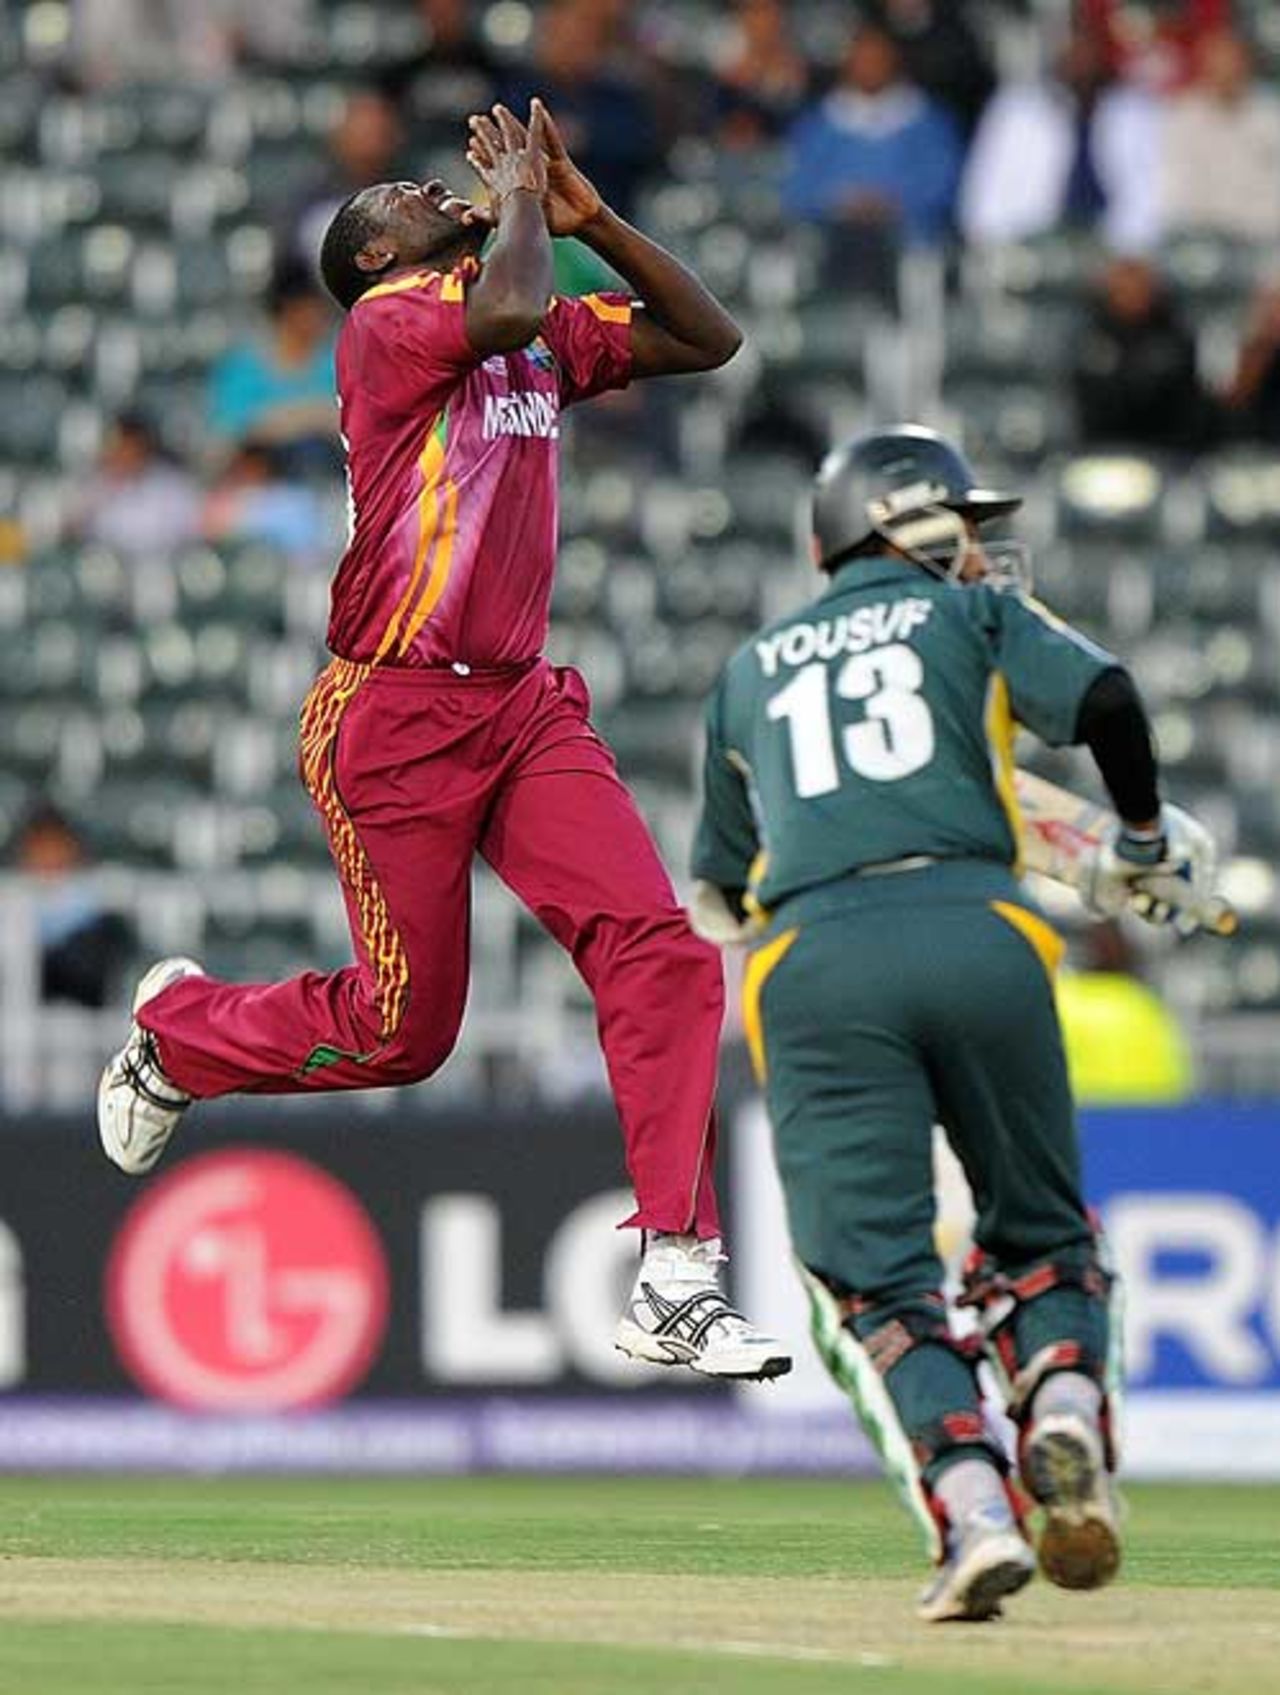 Gavin Tonge grimaces as Mohammad Yousuf is let off , Pakistan v West Indies, Champions Trophy, Group A, Johannesburg, September 23, 2009